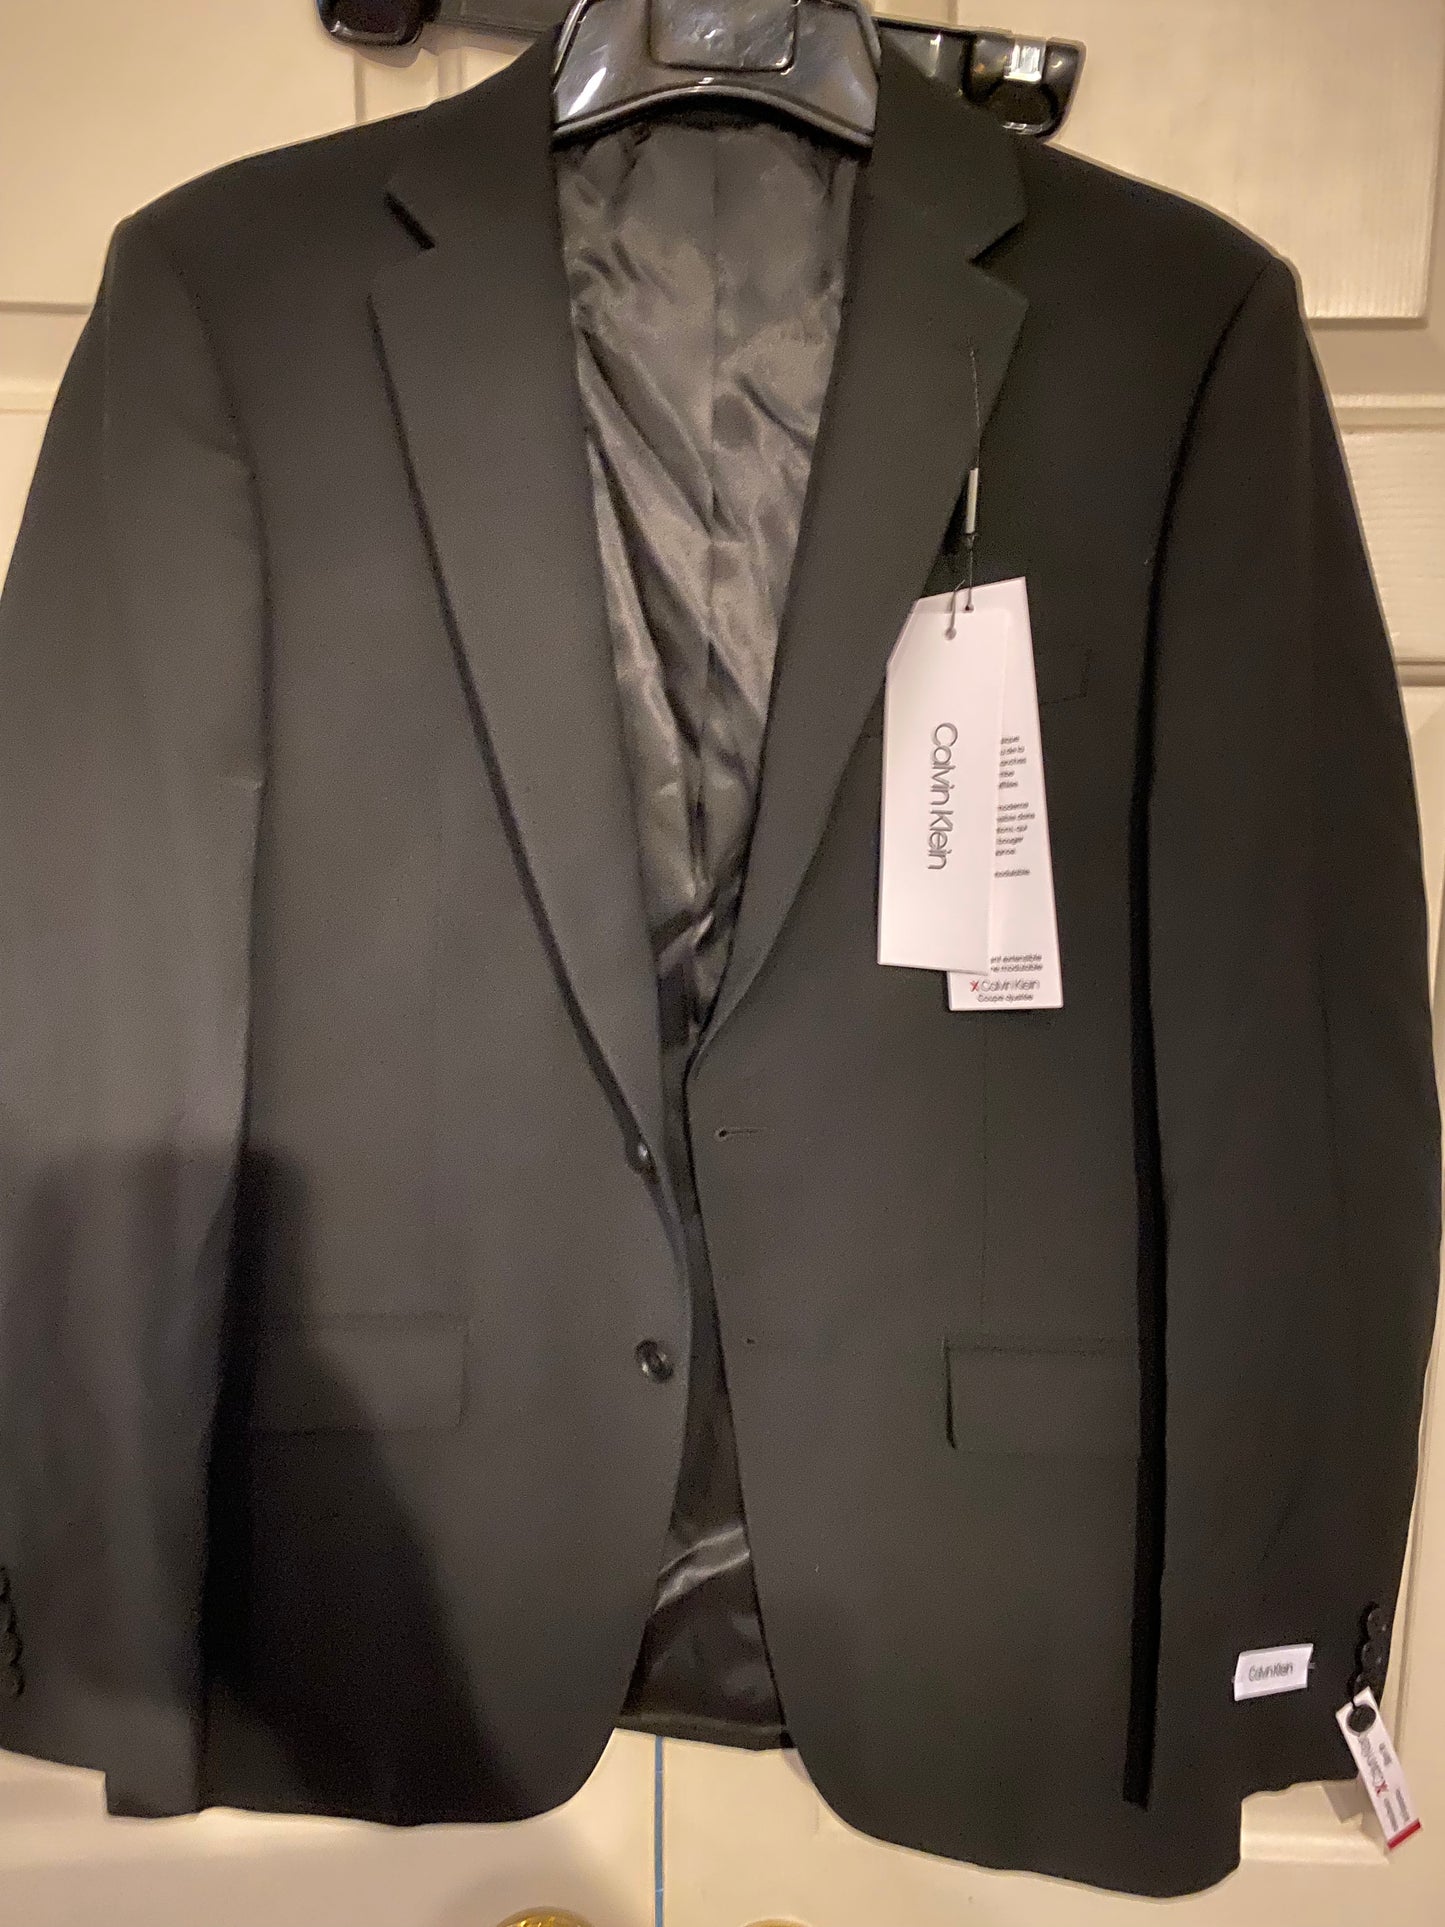 Calvin Klein Men's Slim Fit Suit Jacket size 40R - Brand New With Tags!!!